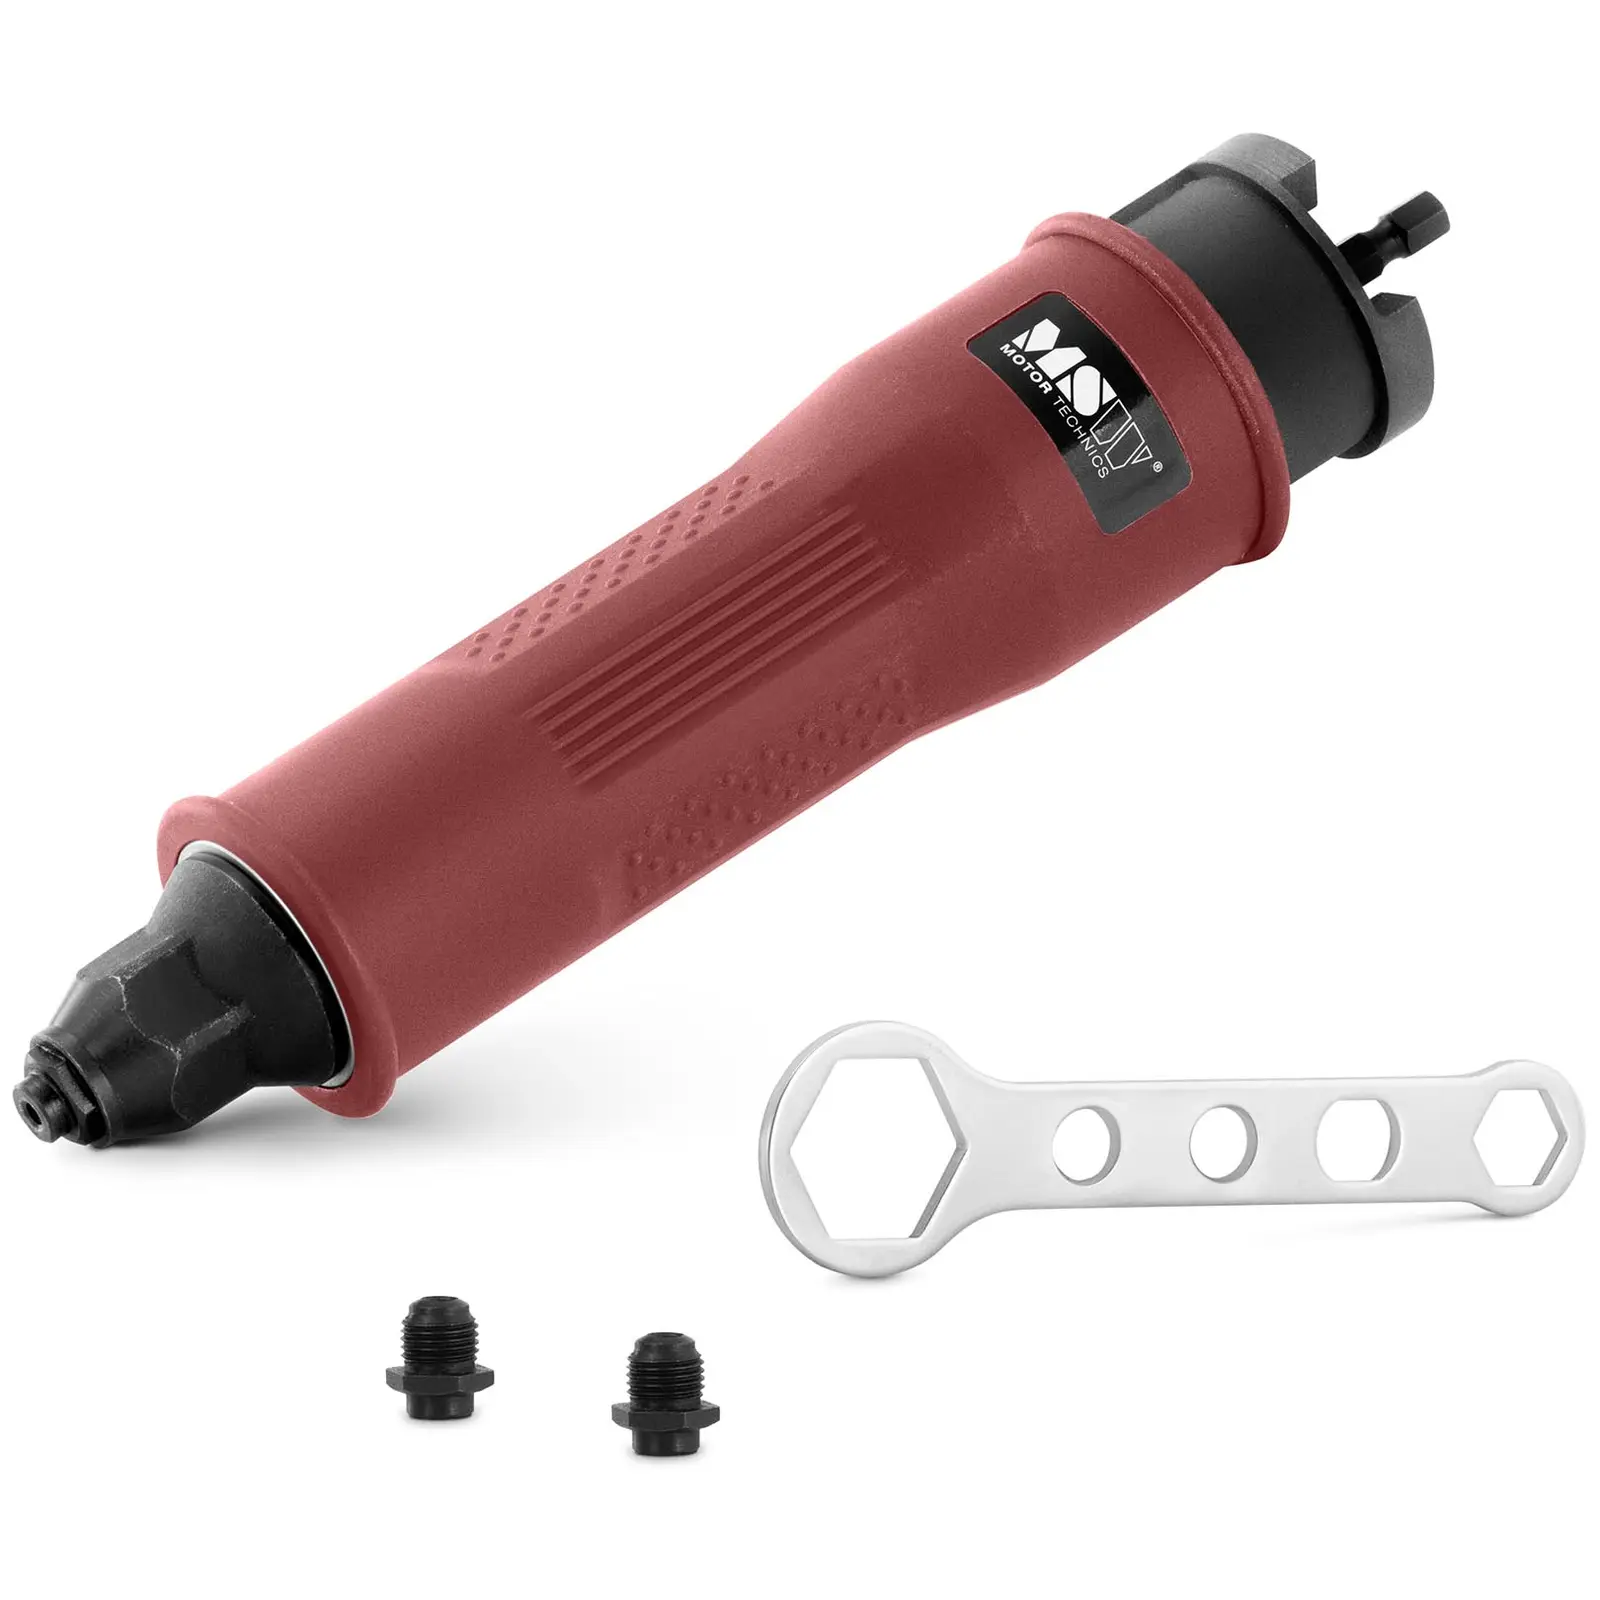 Rivet Adapter and Drill - Ø 2.4 - 5 mm - carbon steel